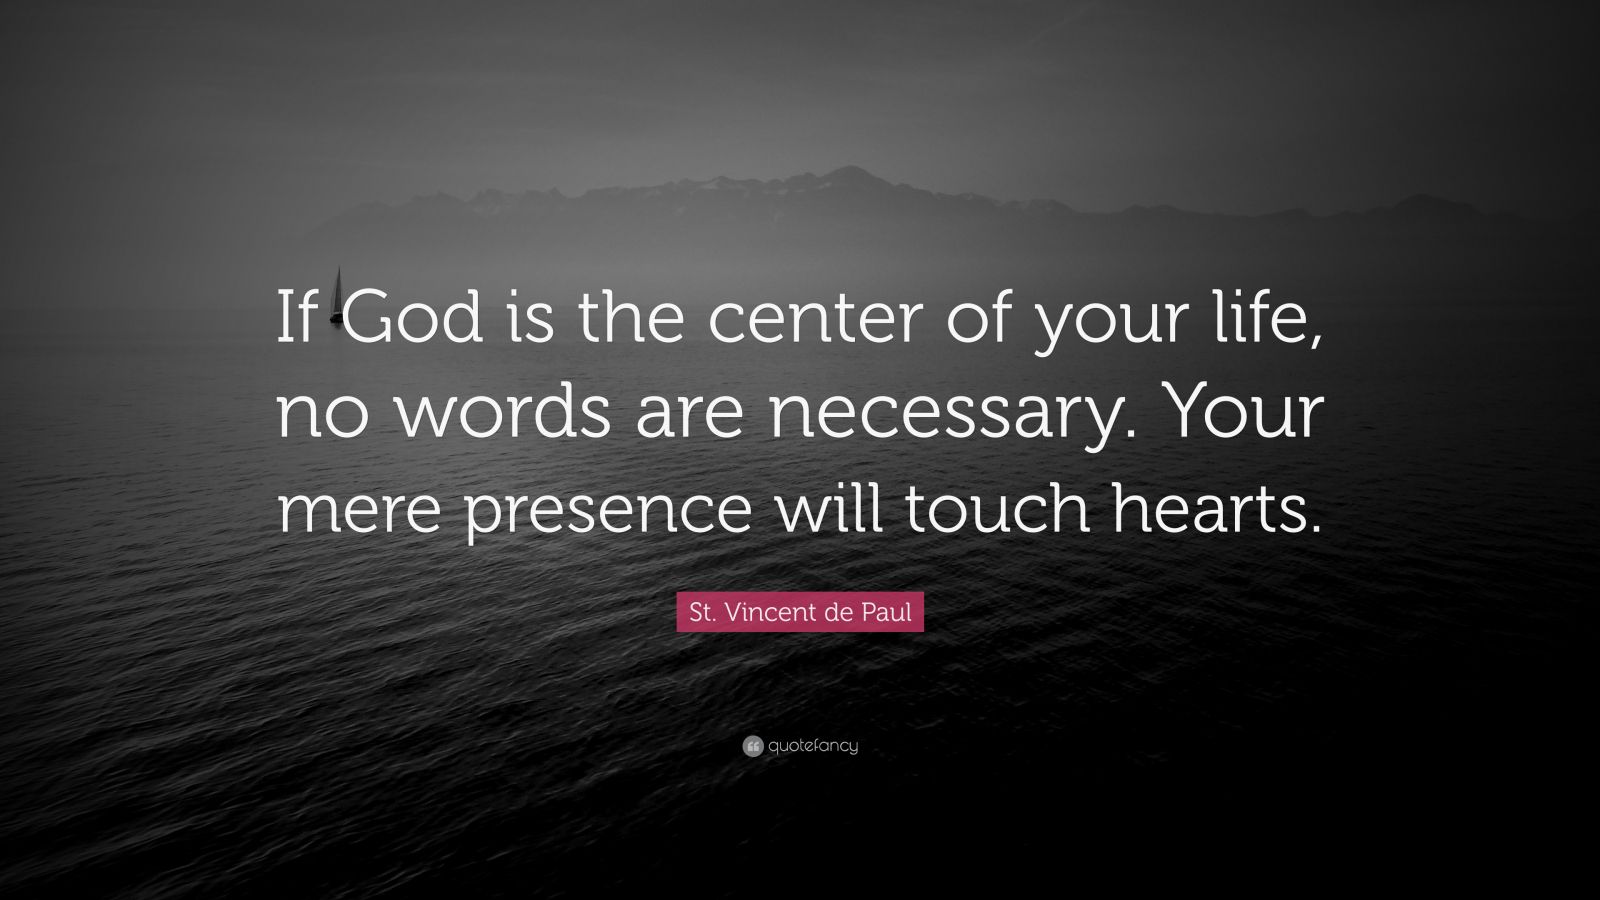 St. Vincent de Paul Quote: “If God is the center of your life, no words